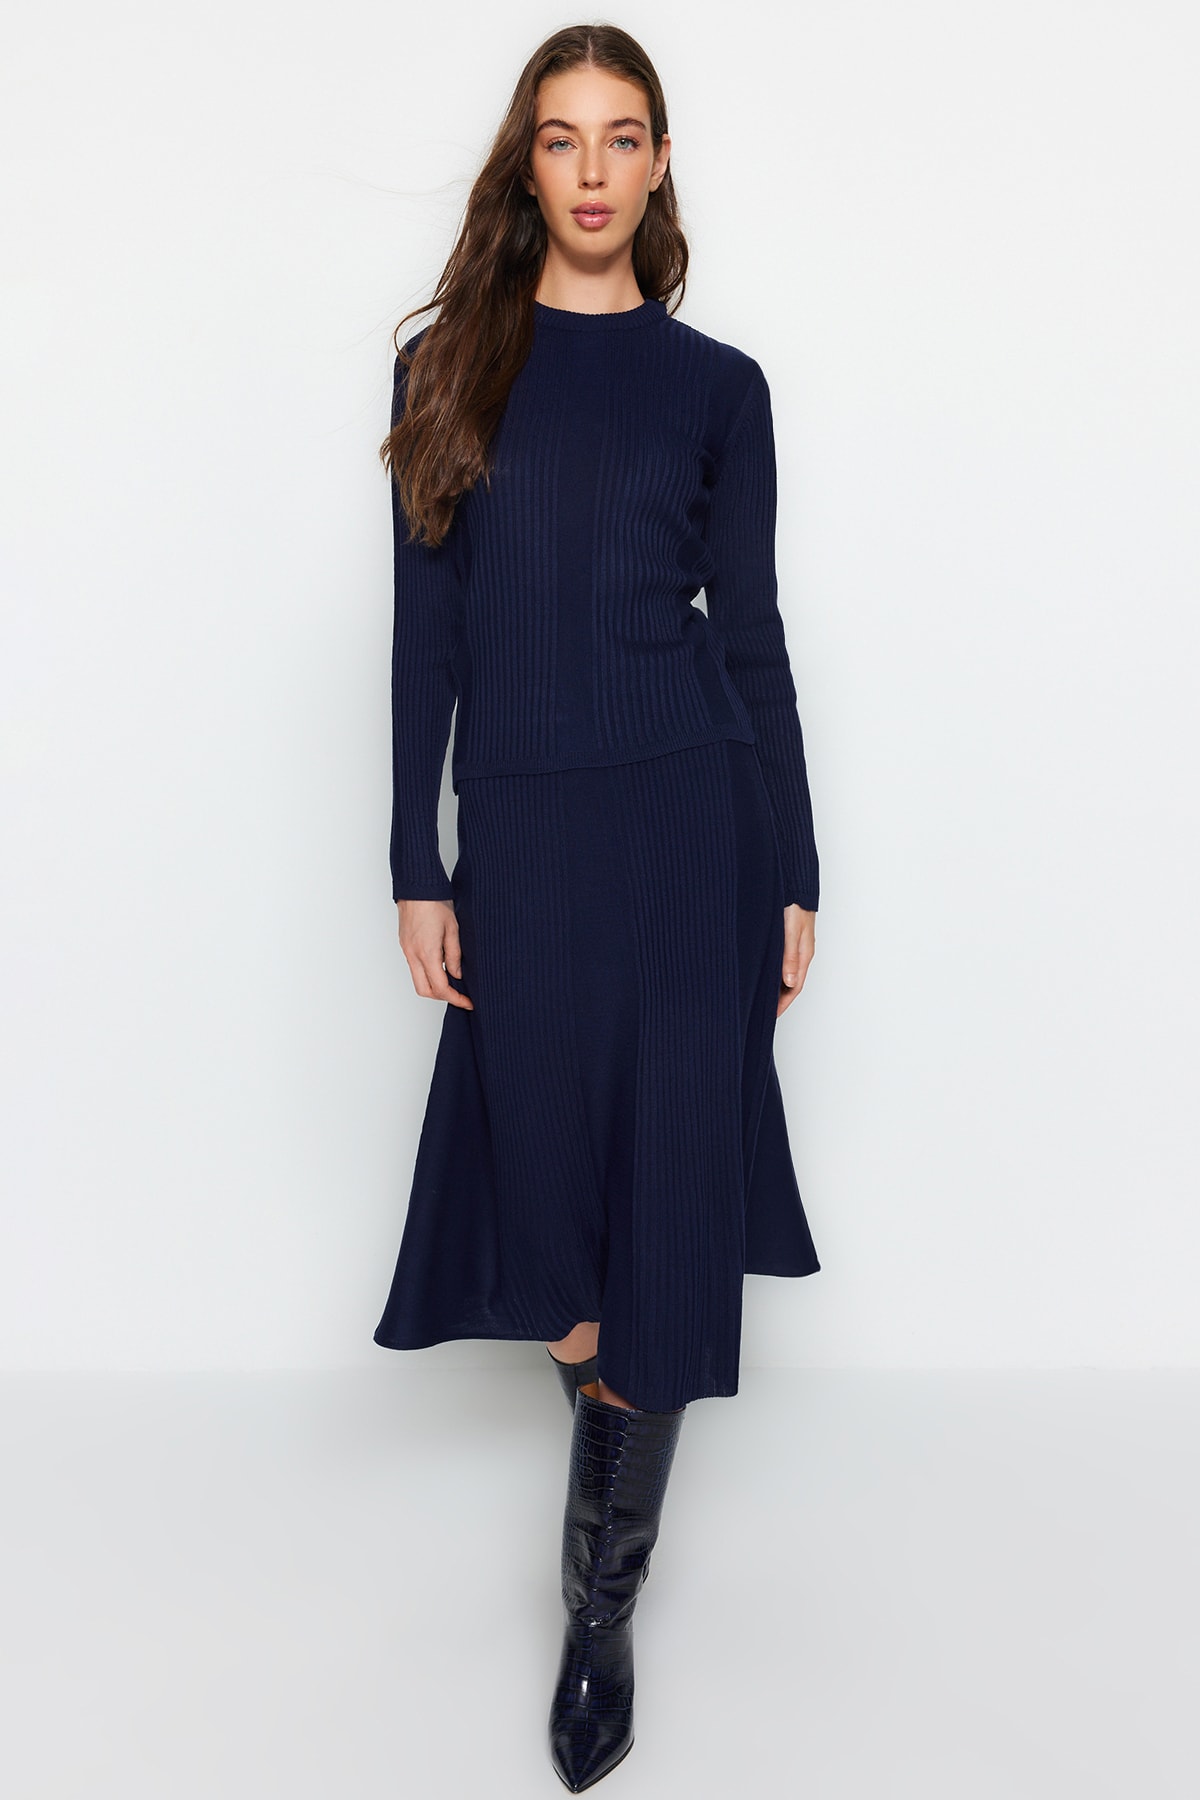 Trendyol Navy Blue Skirt Ribbed Knitwear Two Piece Set